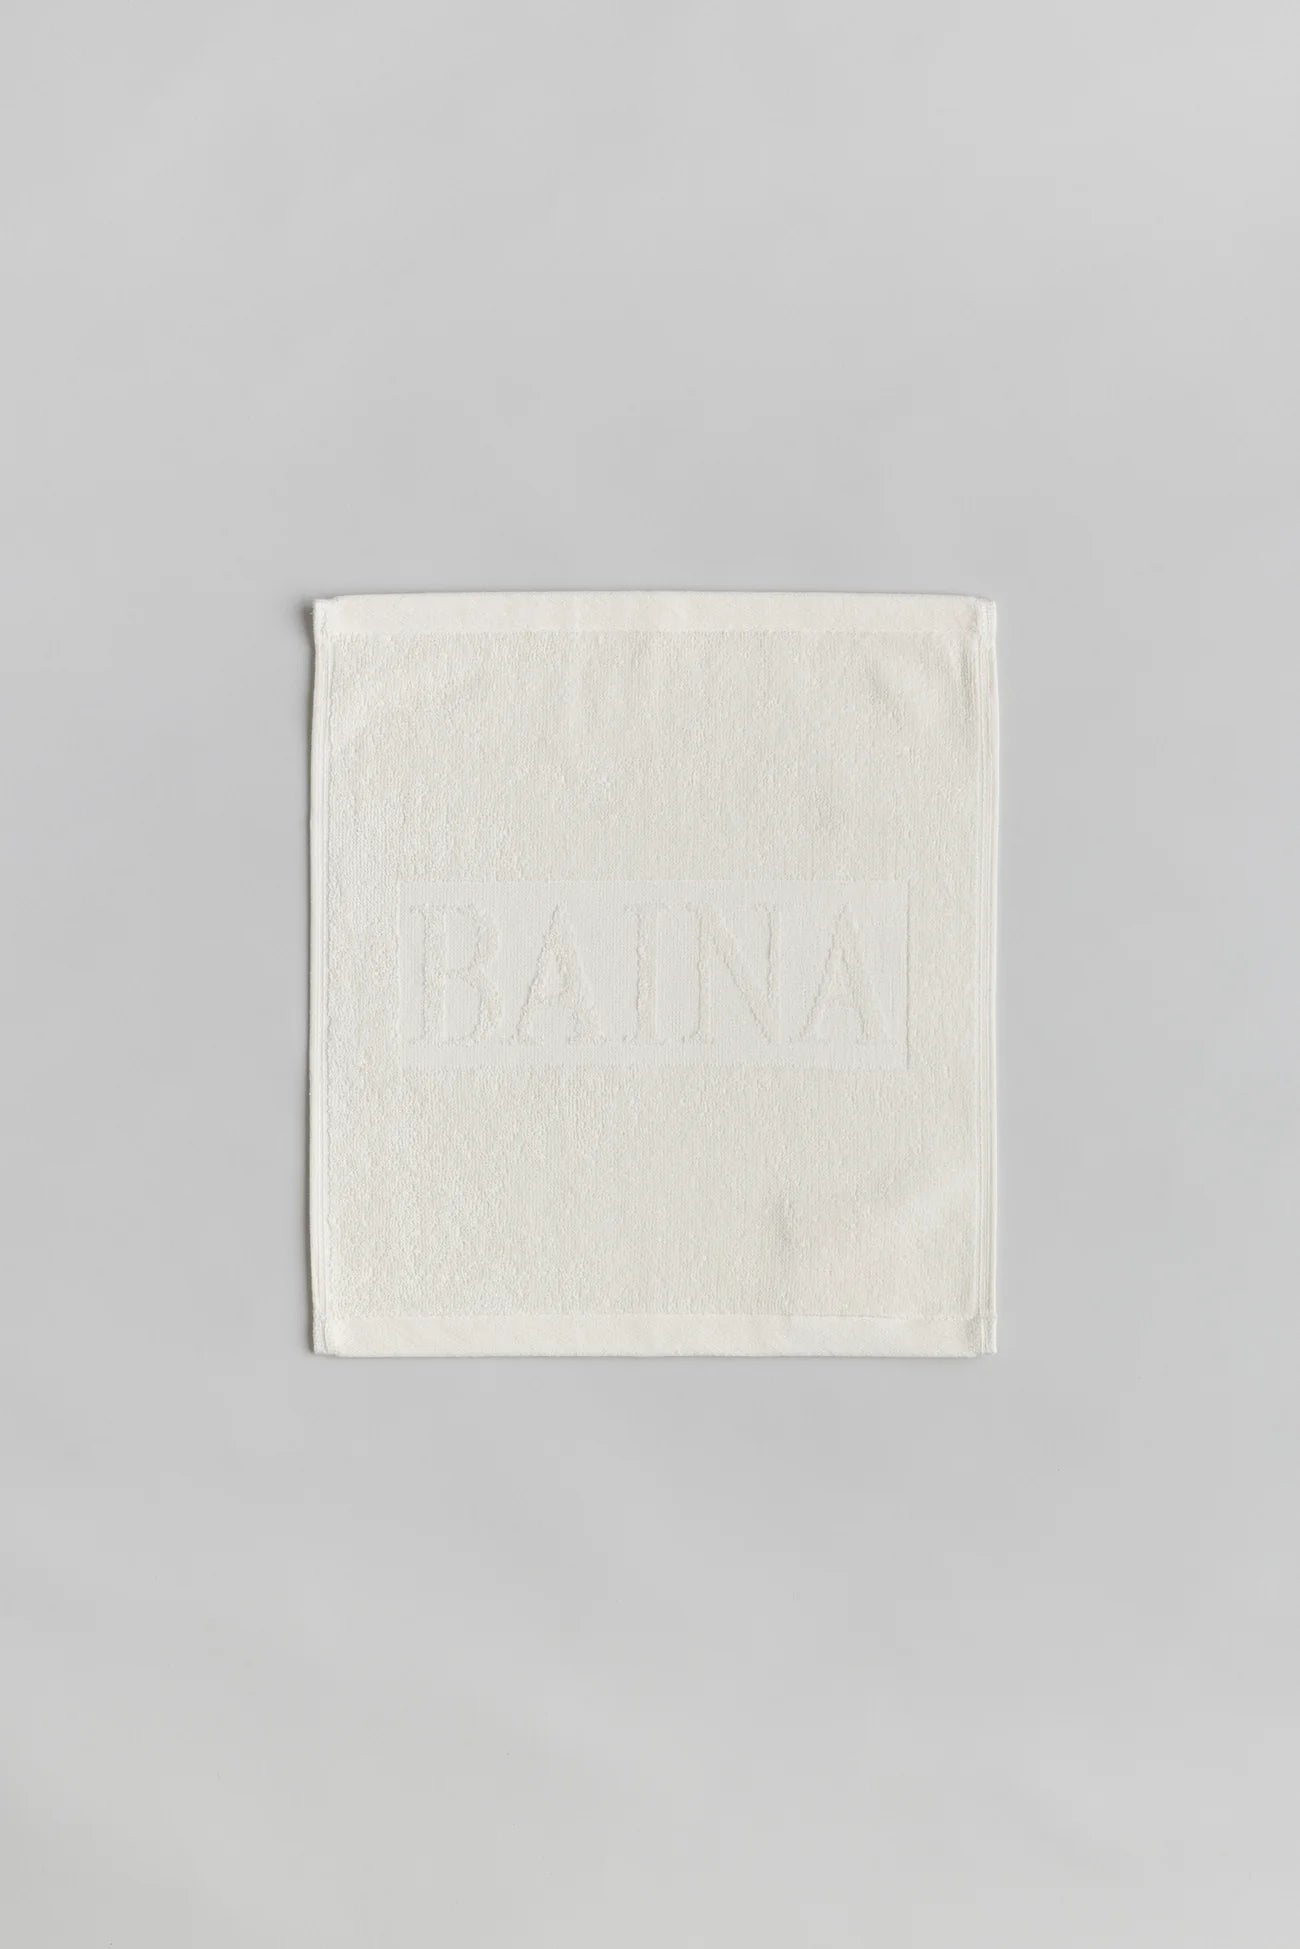 Self Care Set in Ivory, Caper & Chalk by Baina